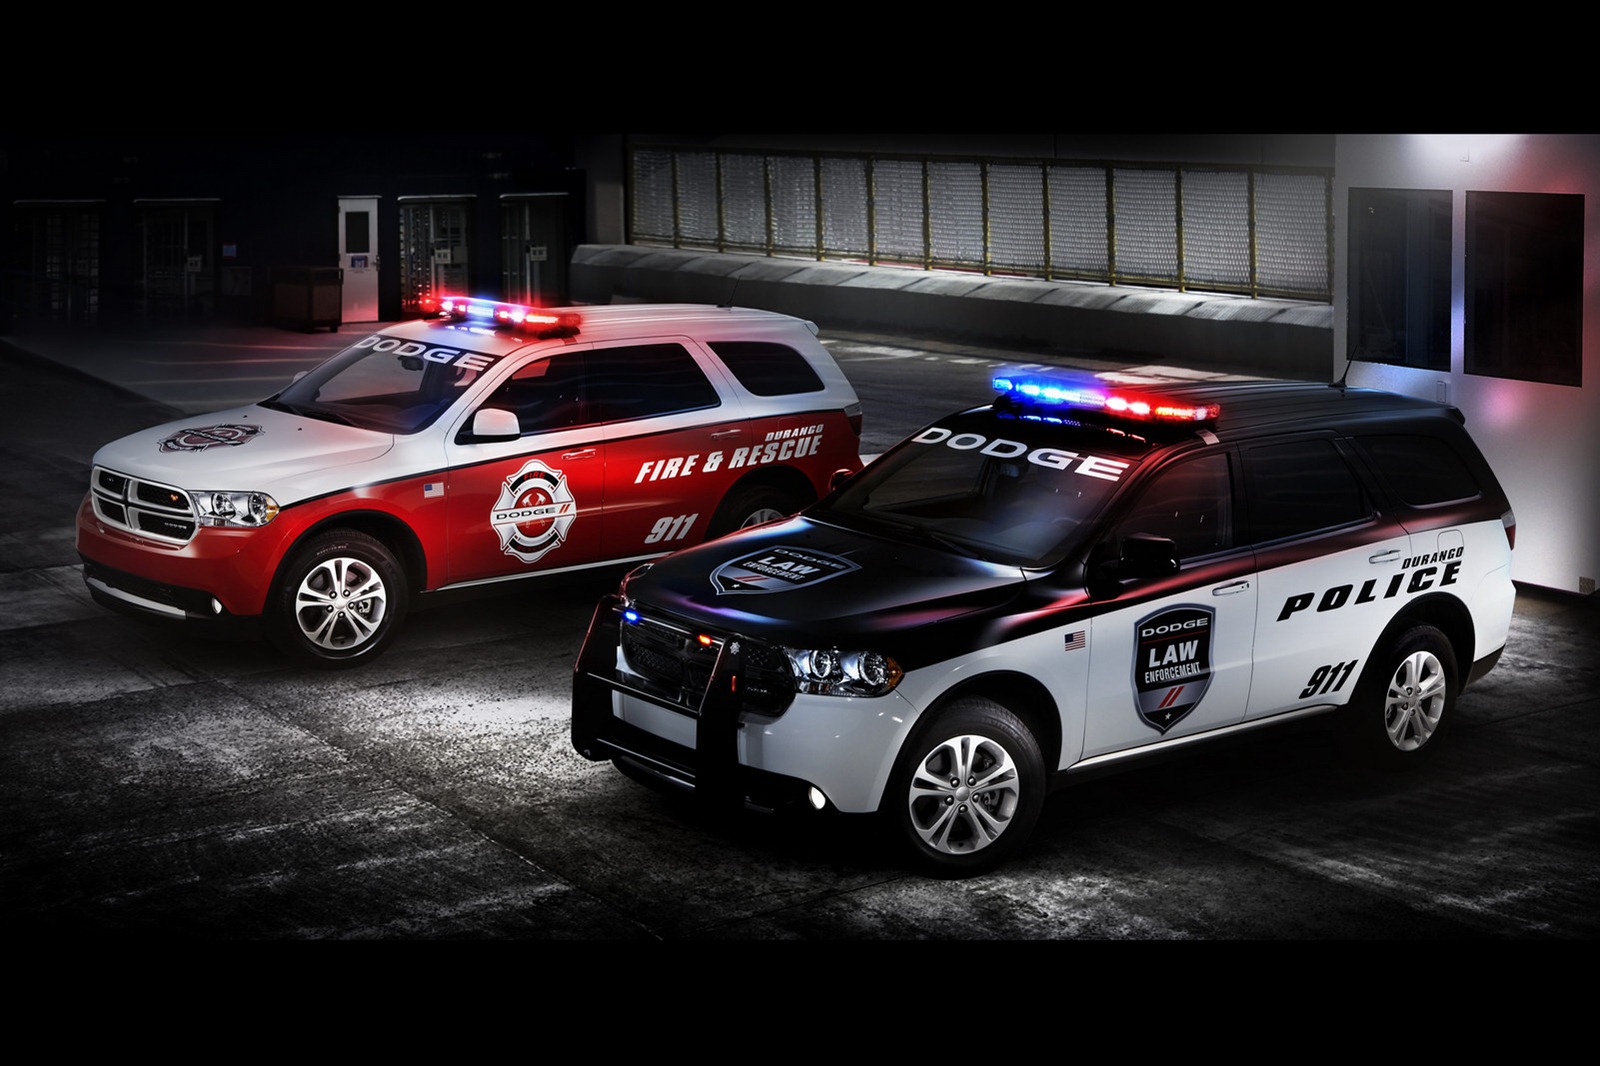 Dodge Durango Police and Fire & Rescue 2012 photo 77495 pictures ...